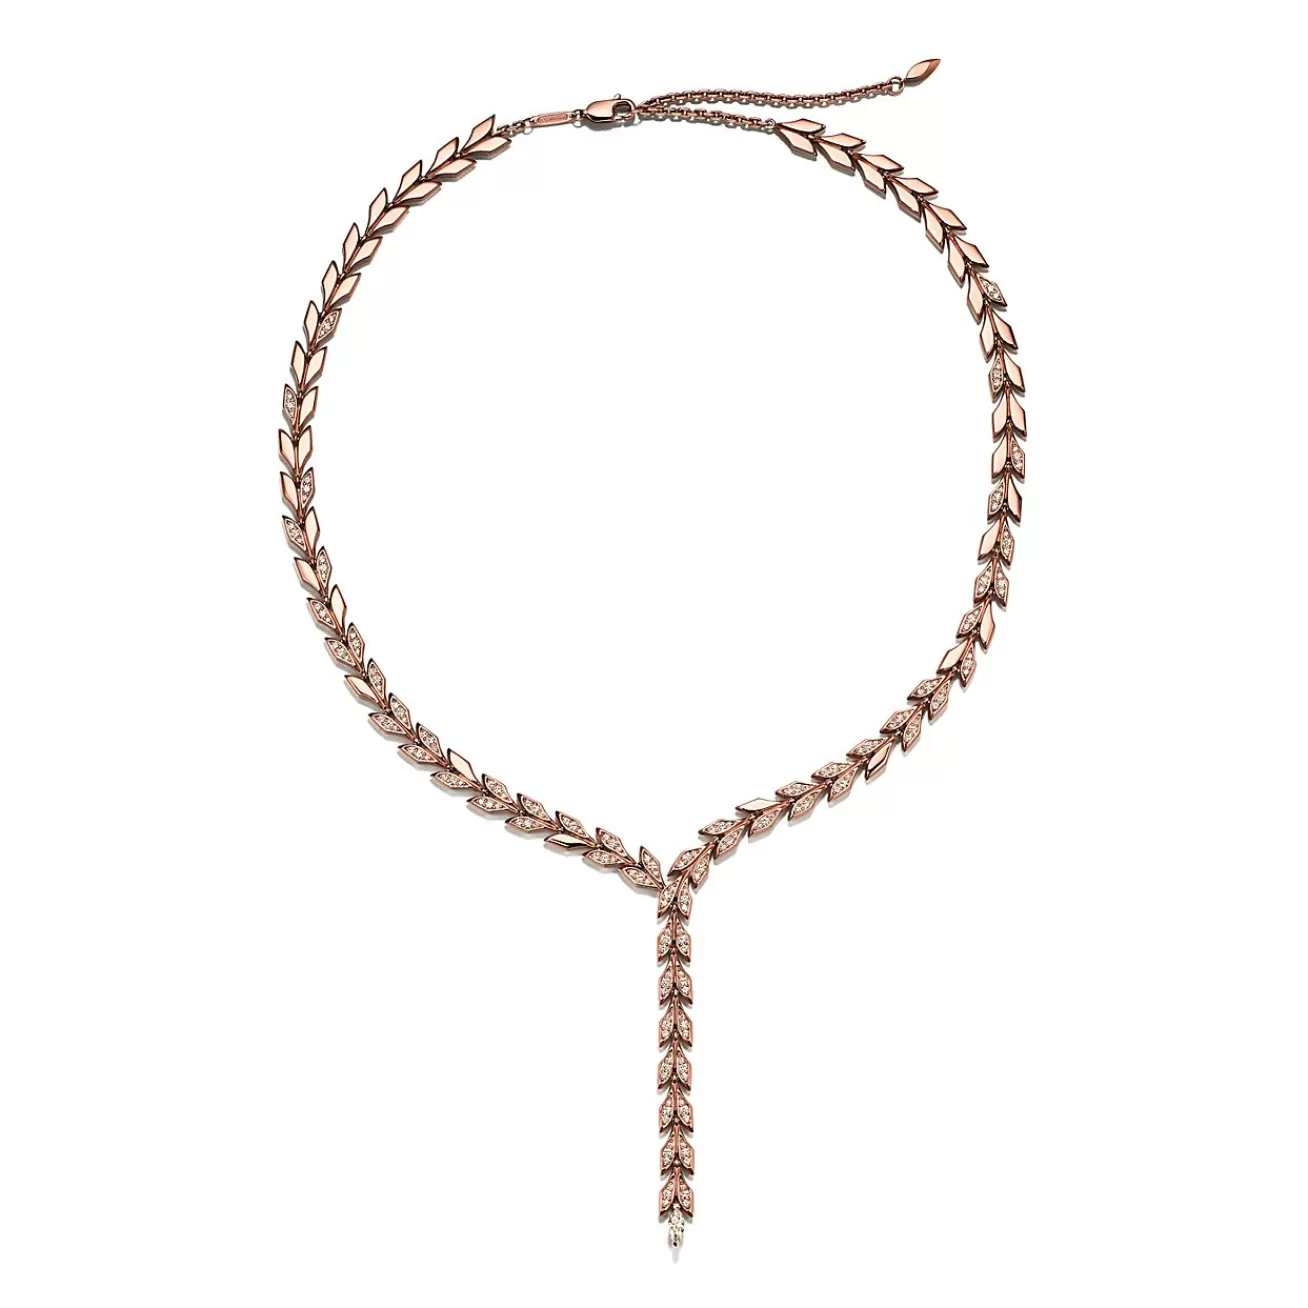 Tiffany & Co. Tiffany Victoria® Vine Drop Necklace in Rose Gold with Diamonds | ^ Necklaces & Pendants | Rose Gold Jewelry